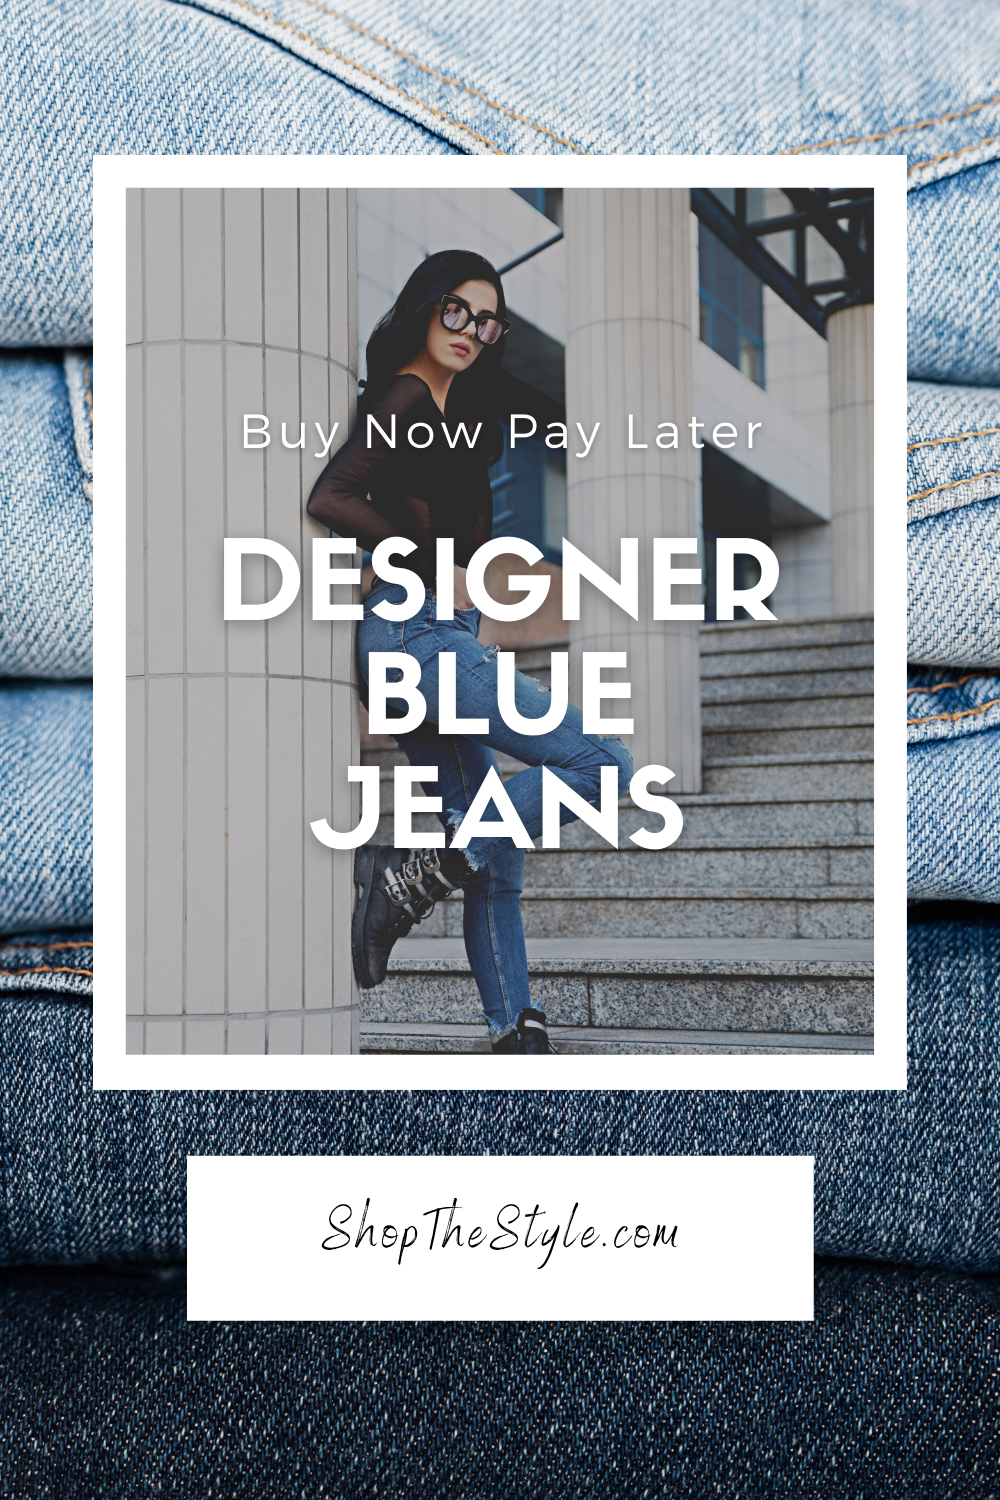 Buy Now Pay Later: Designer Jeans